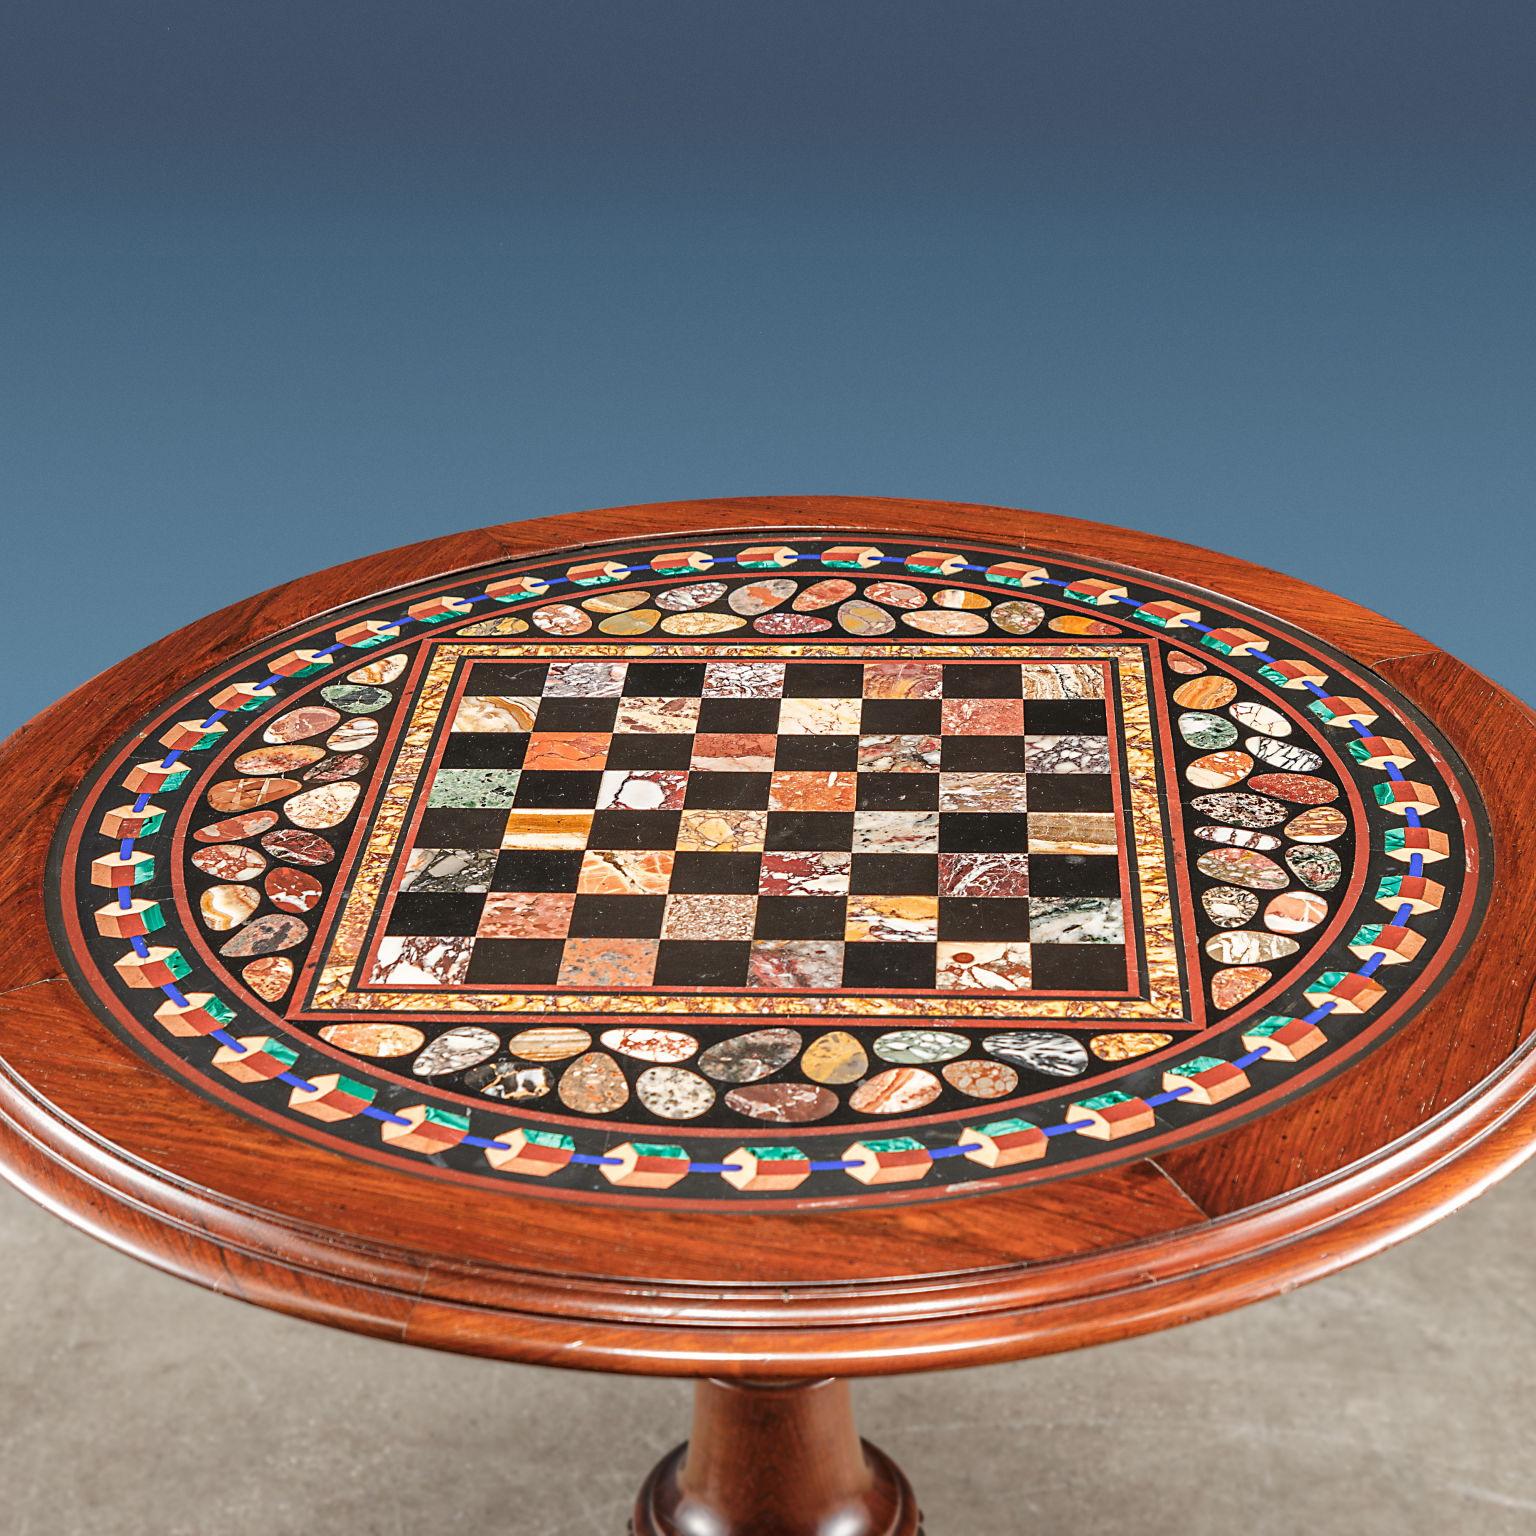 Circular top in marble committed, with polychrome chessboard in the center; the marble is framed in a rosewood support, supported by a central turned baluster resting on three shaped and fluted feet.
The octagonal top in polychrome marble works